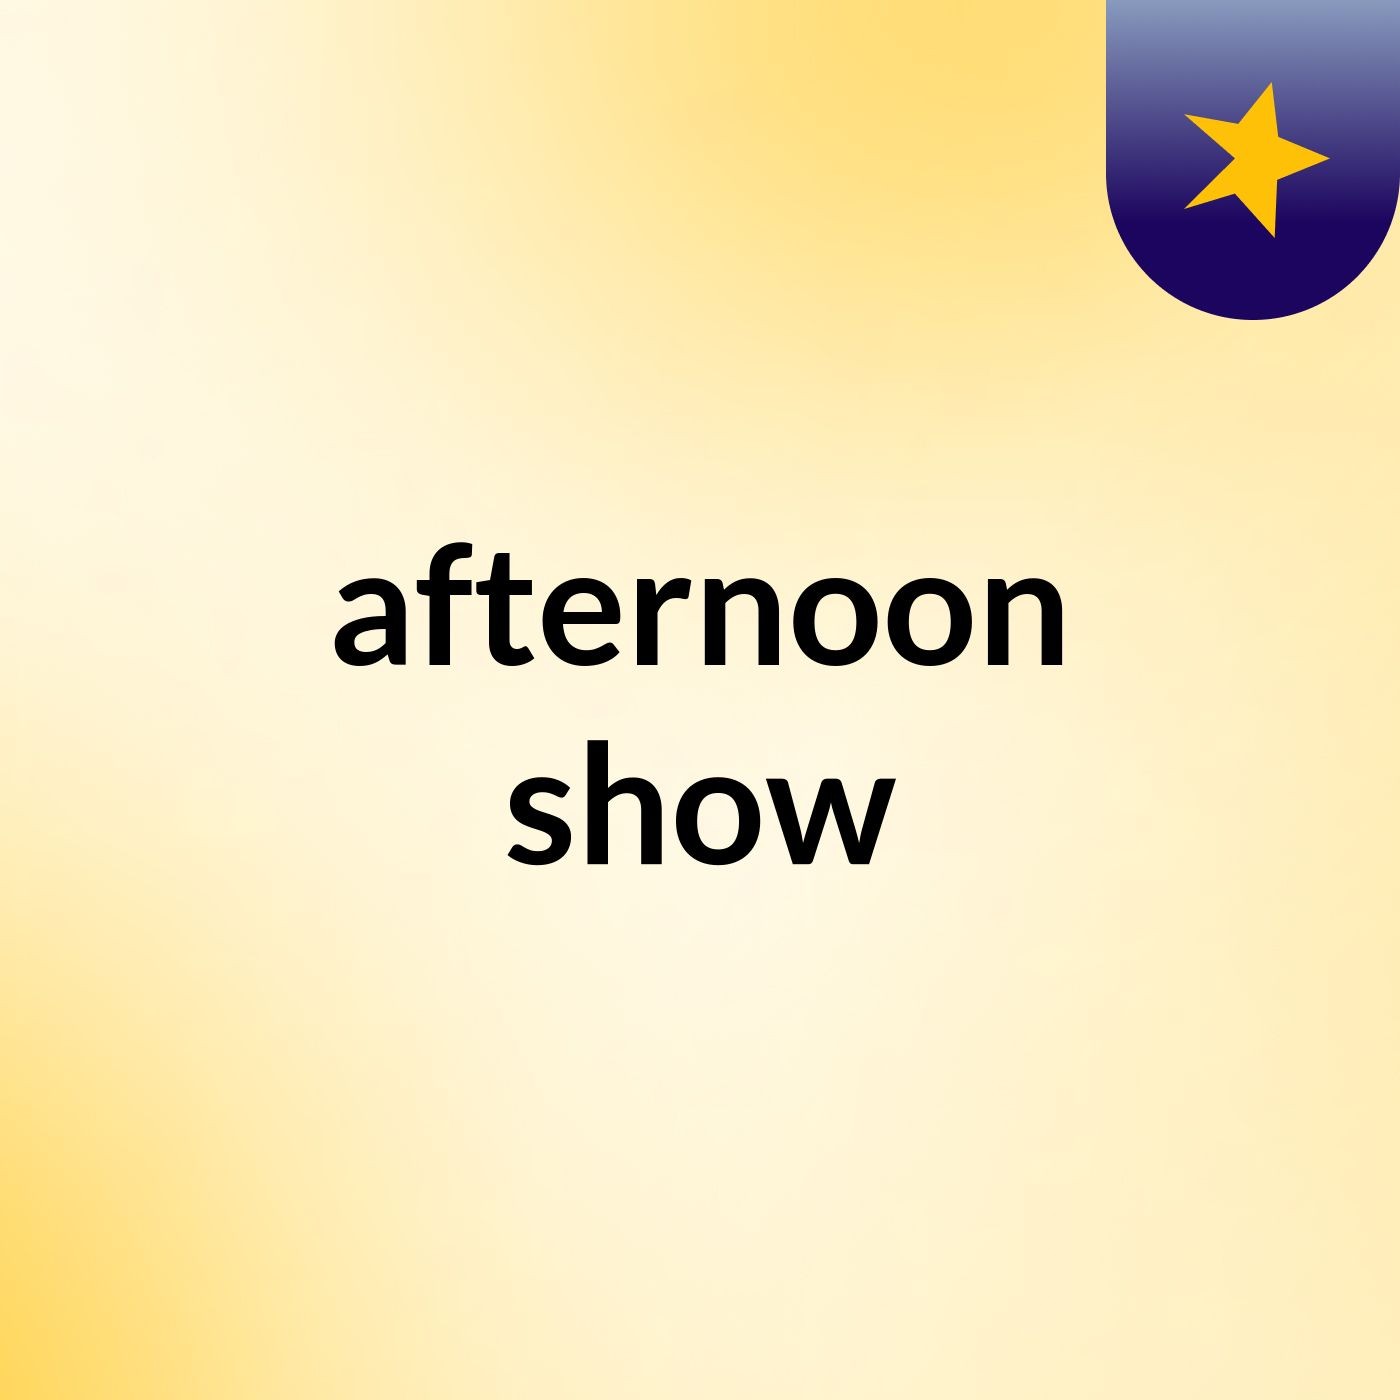 afternoon show